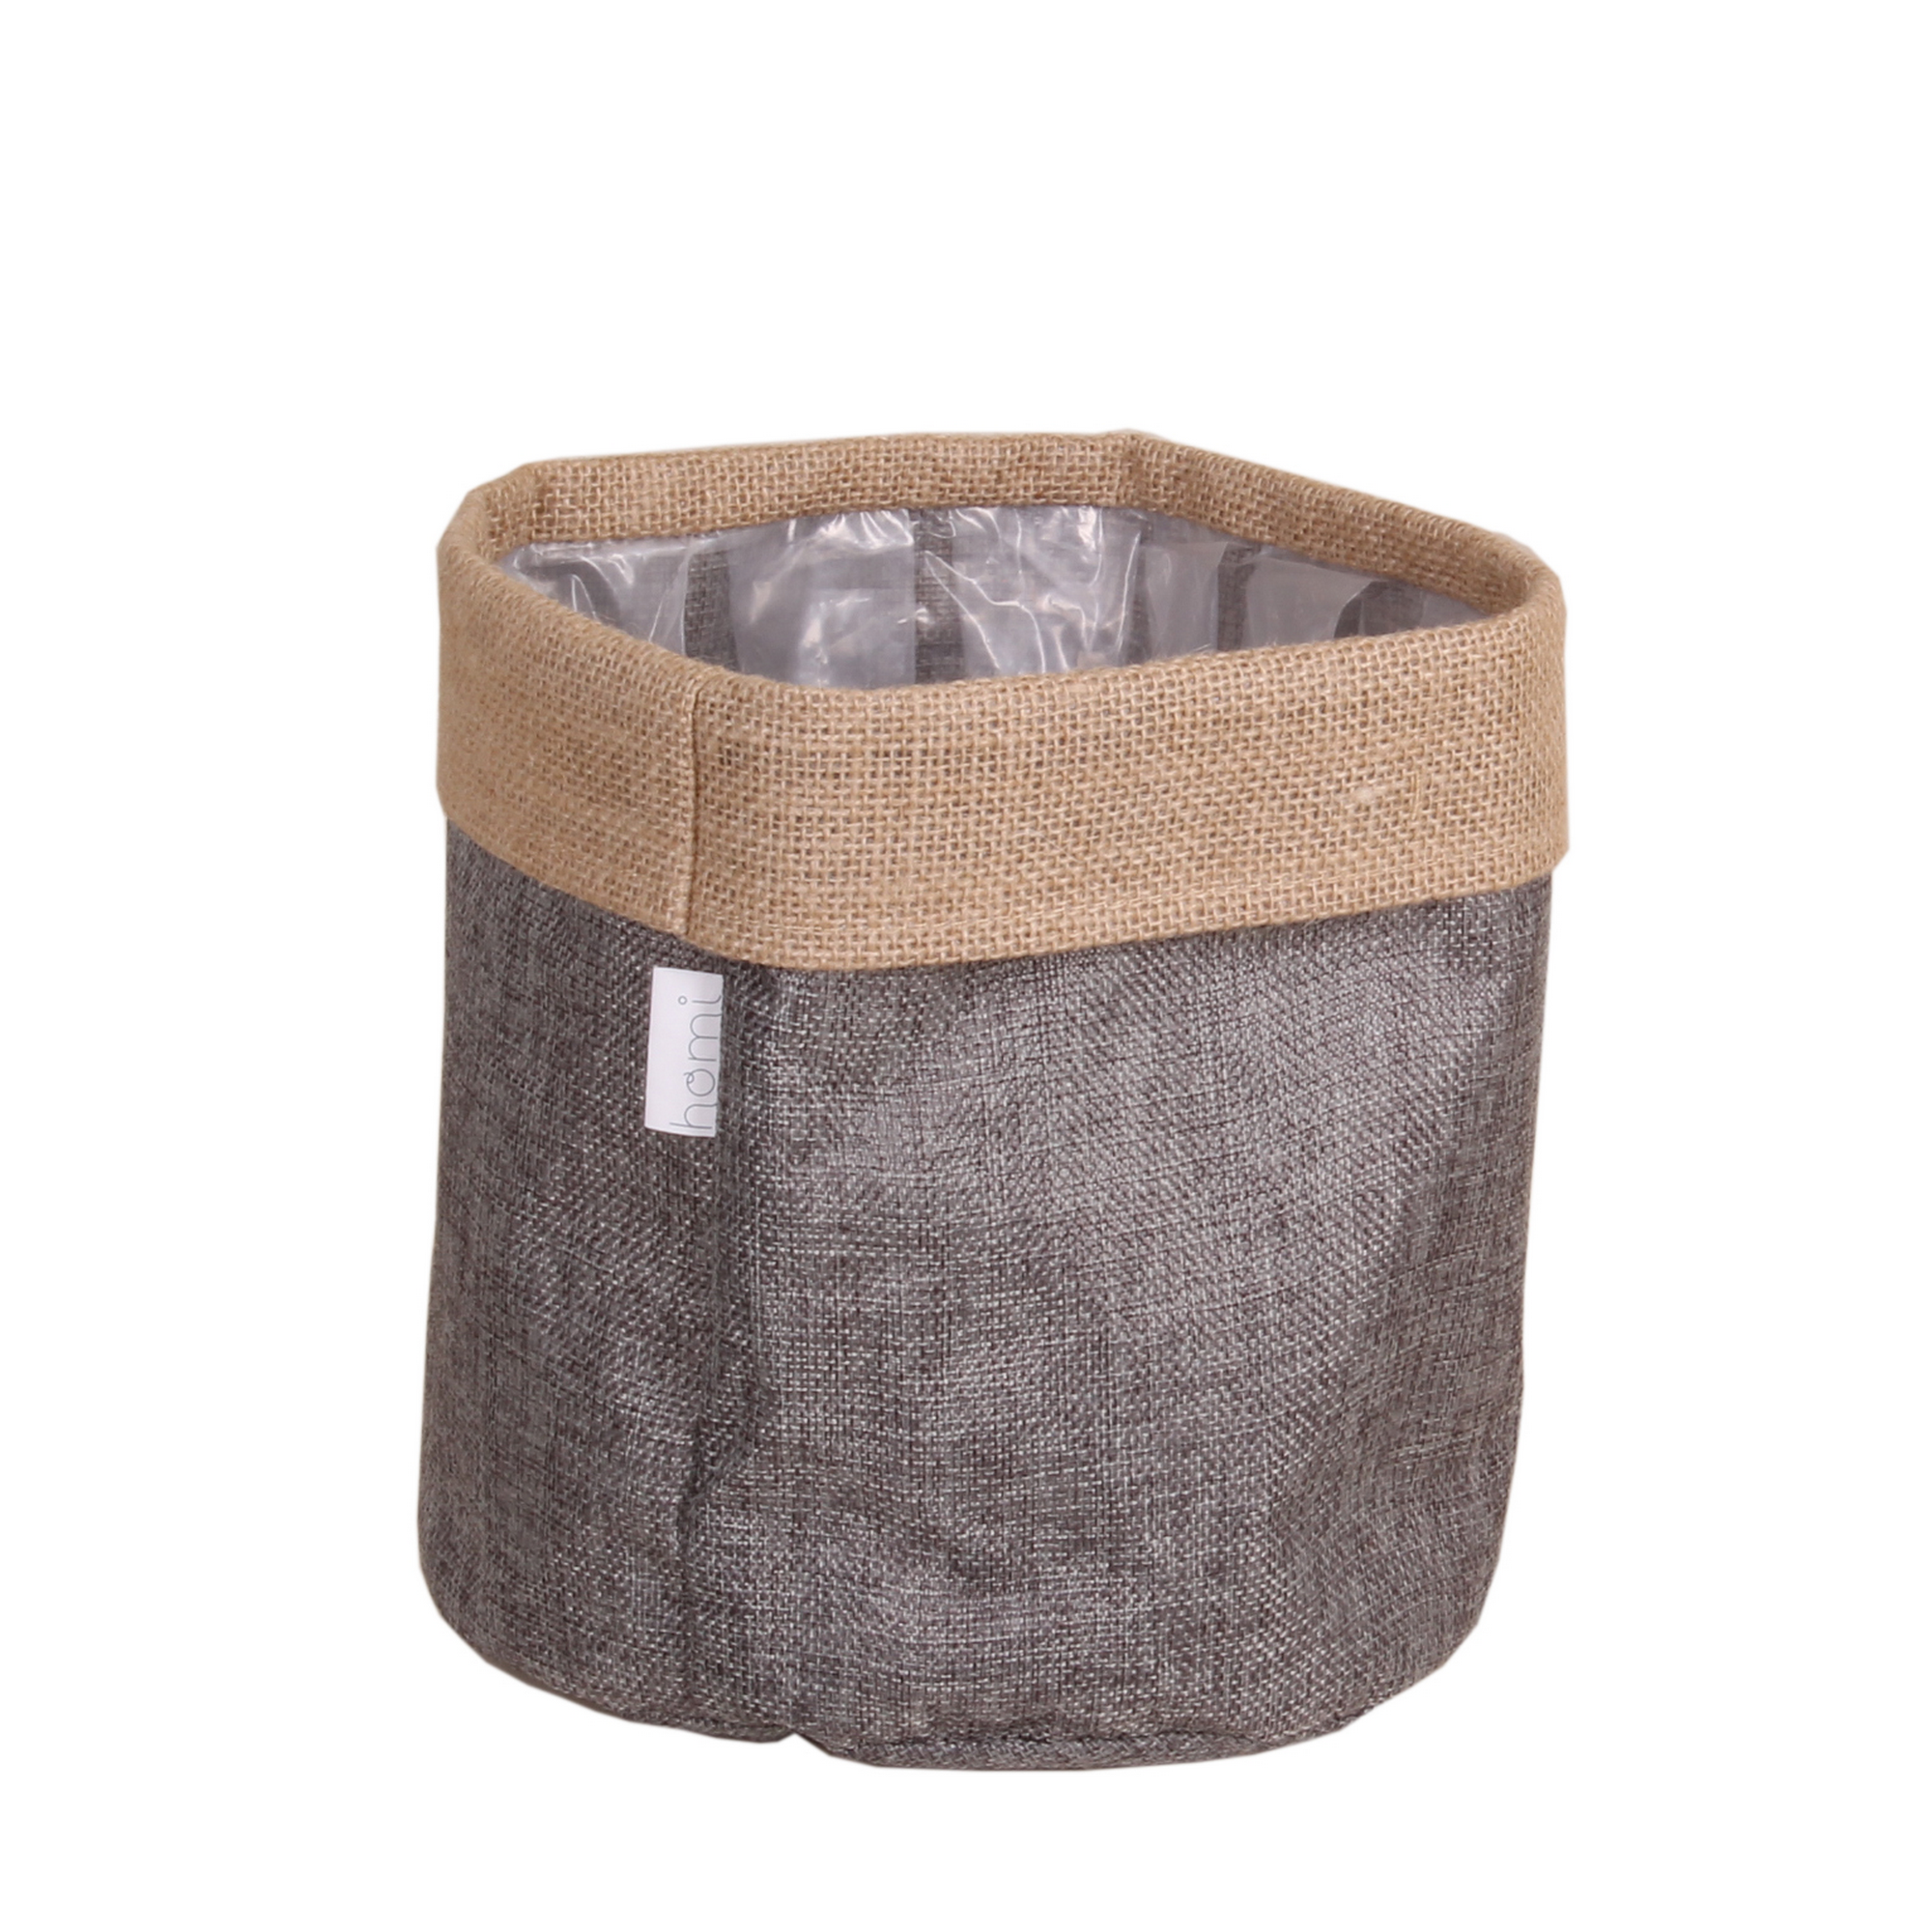 Pflanzkorb Jute/Polyester natur/grau Ø 25 x 25 cm + product picture